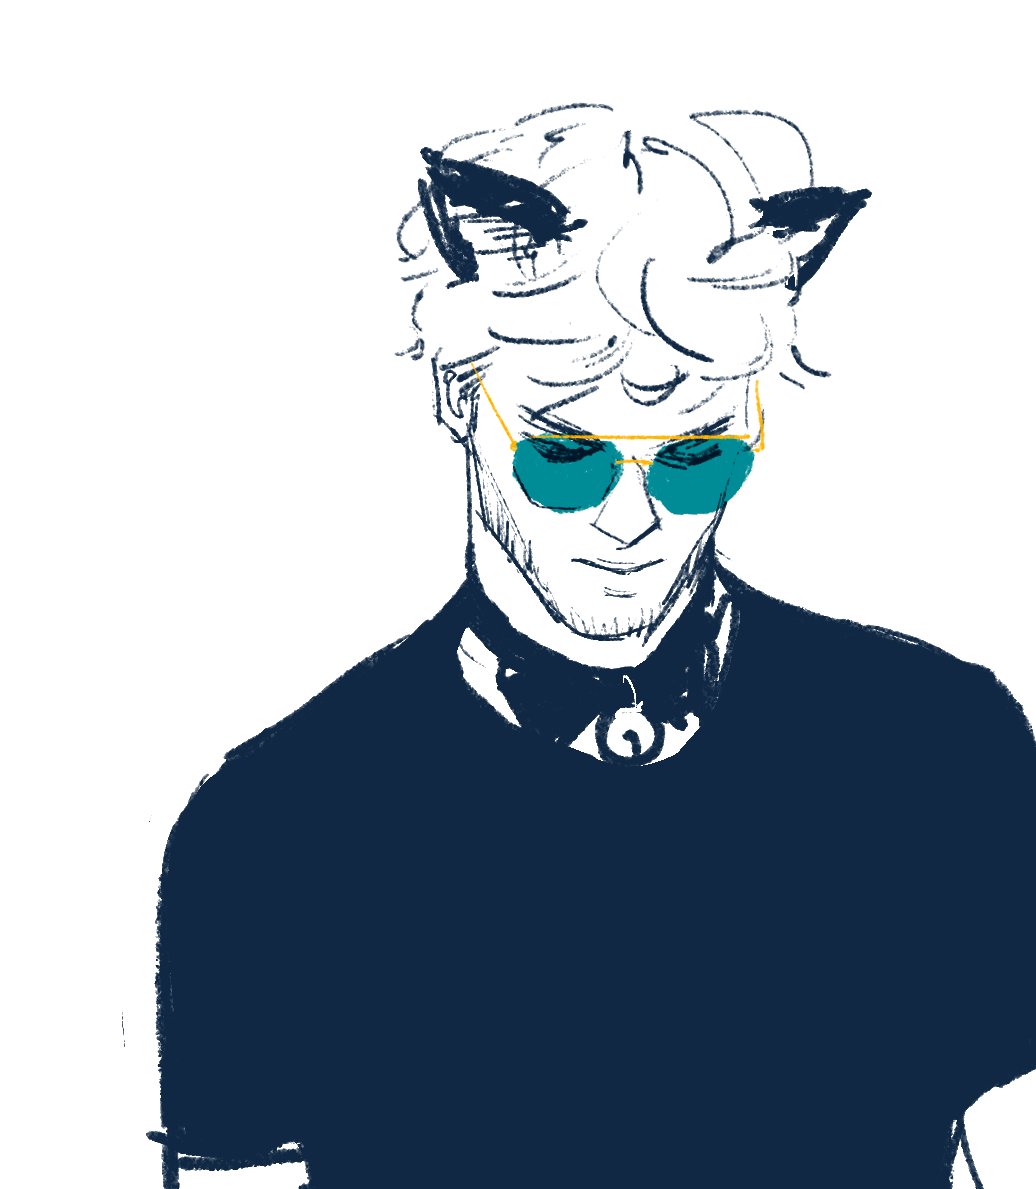 pierre+cat costume (just added cat ears and ribbons on a sketch that's been sitting on my folder for a month)